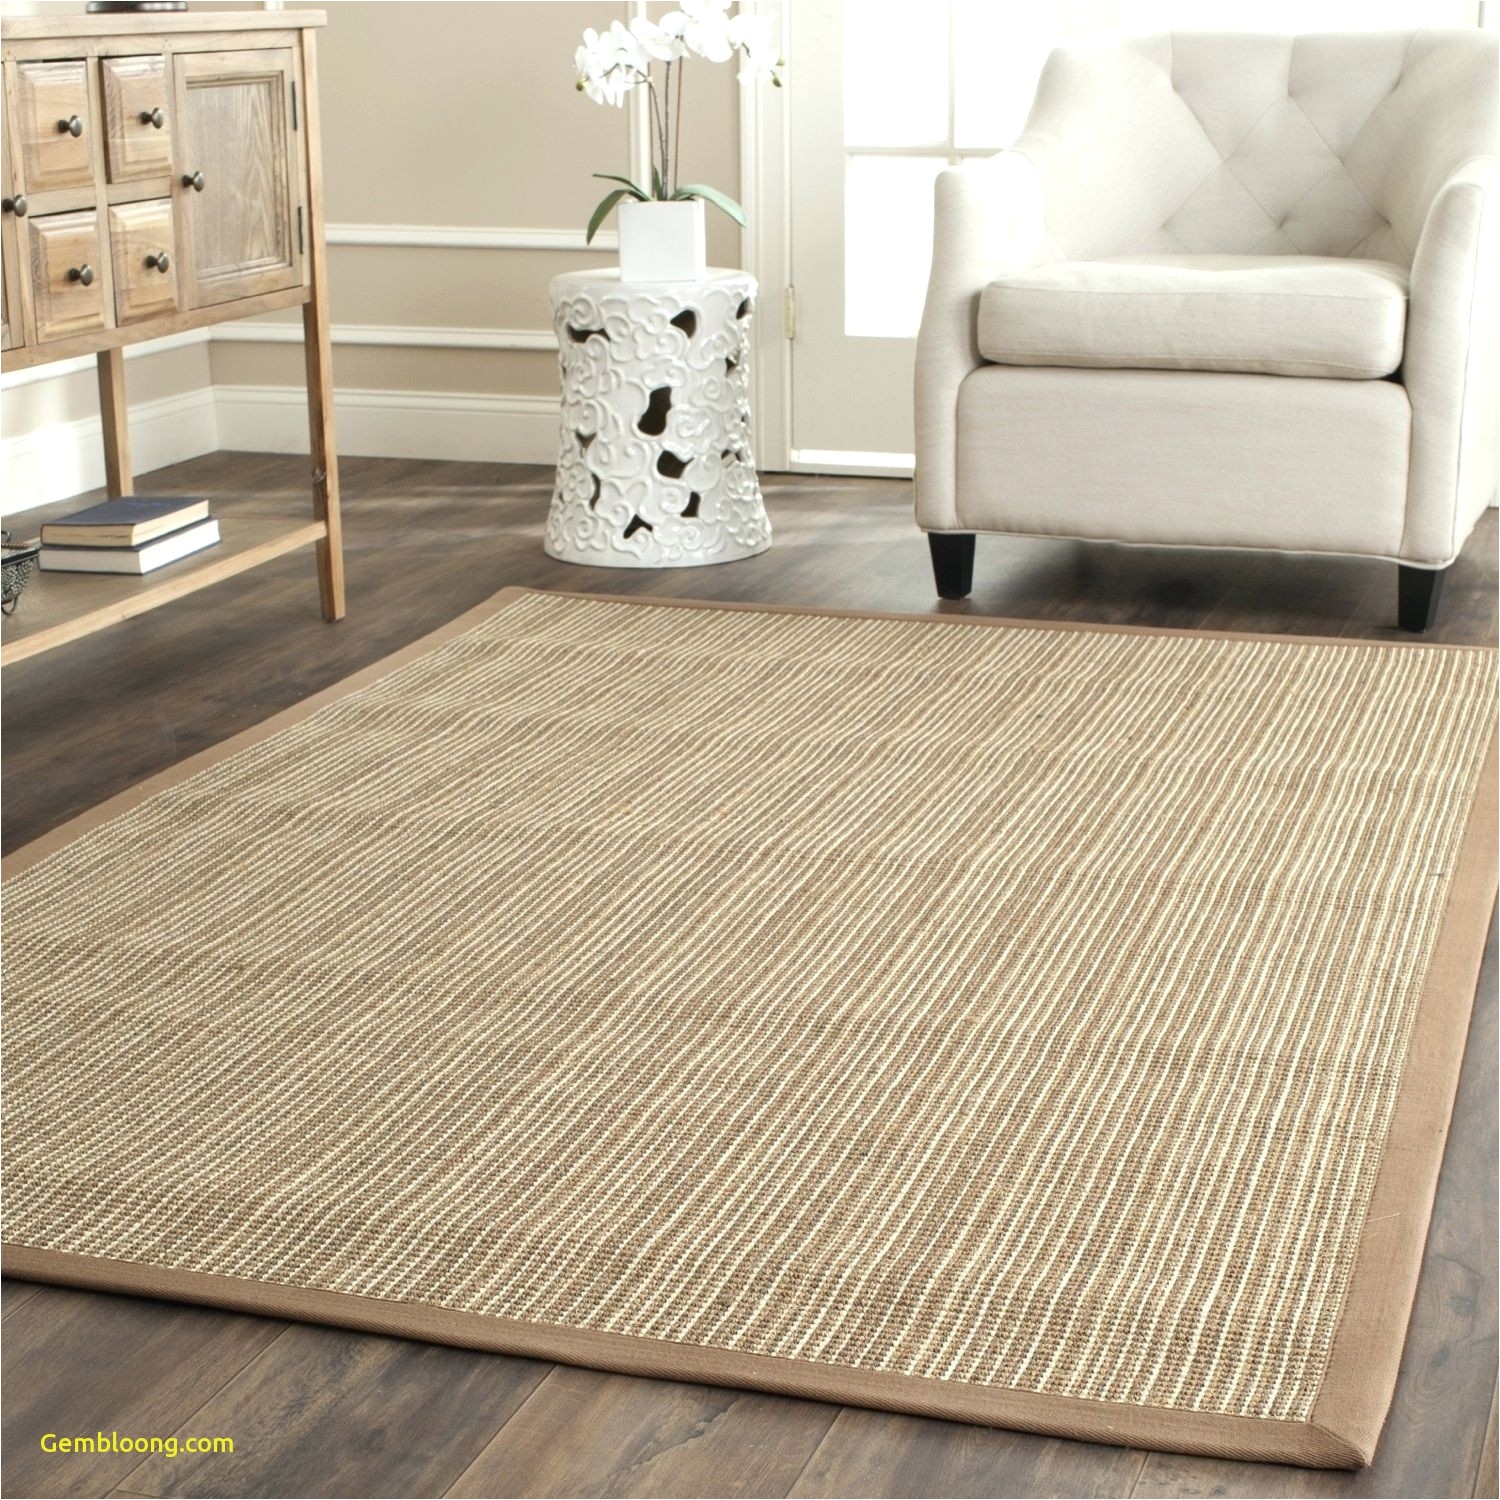 full size of home design home depot patio rugs luxury outdoor rugs free outdoor rugs